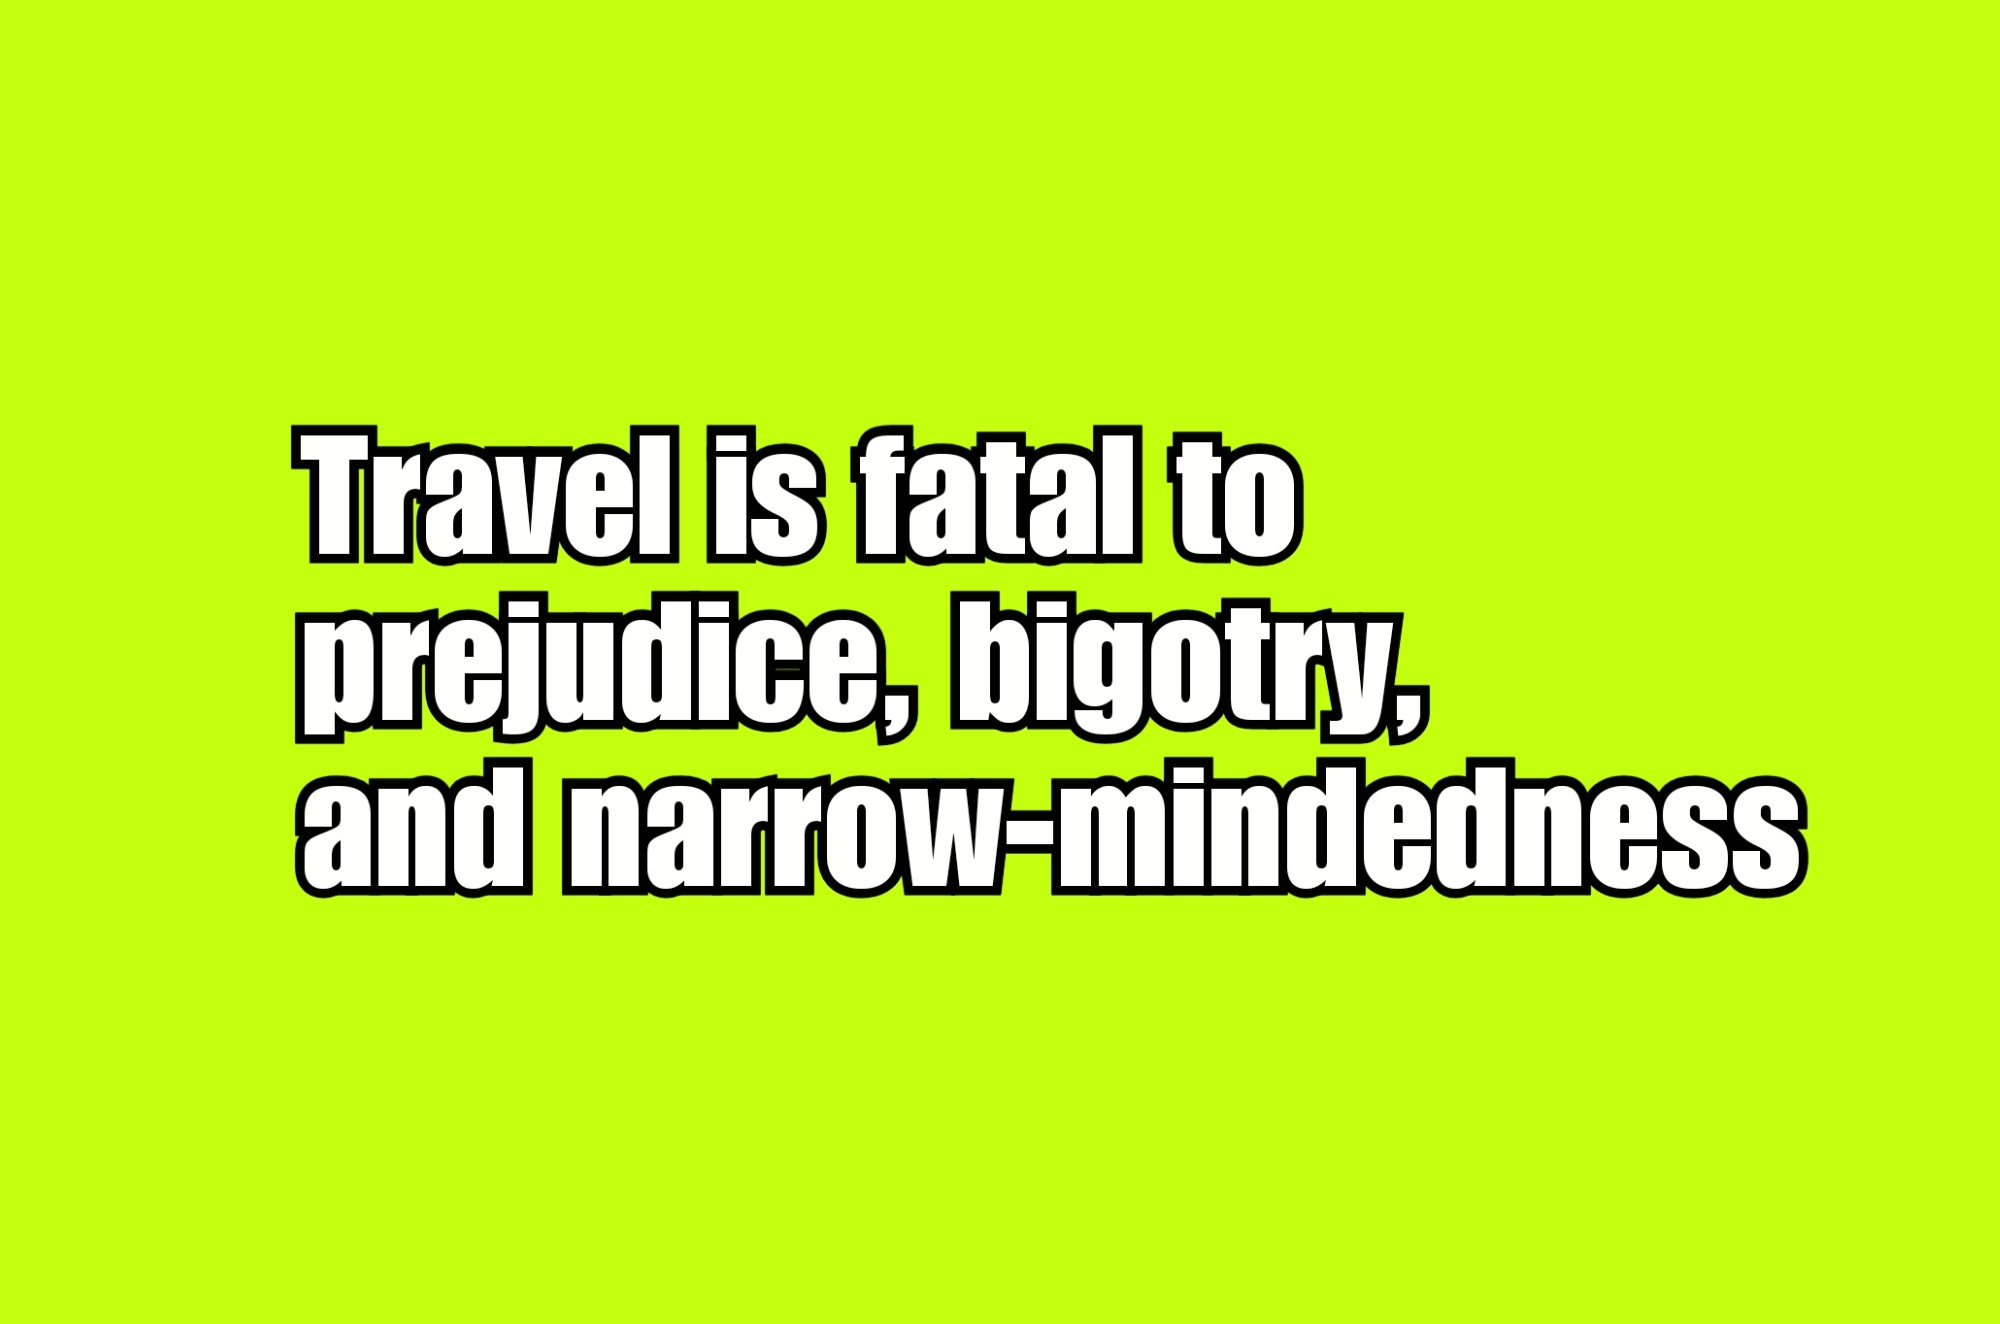 Share Frank's post about beating prejudice, bigotry, and narrow-mindedness by travel after pandemic